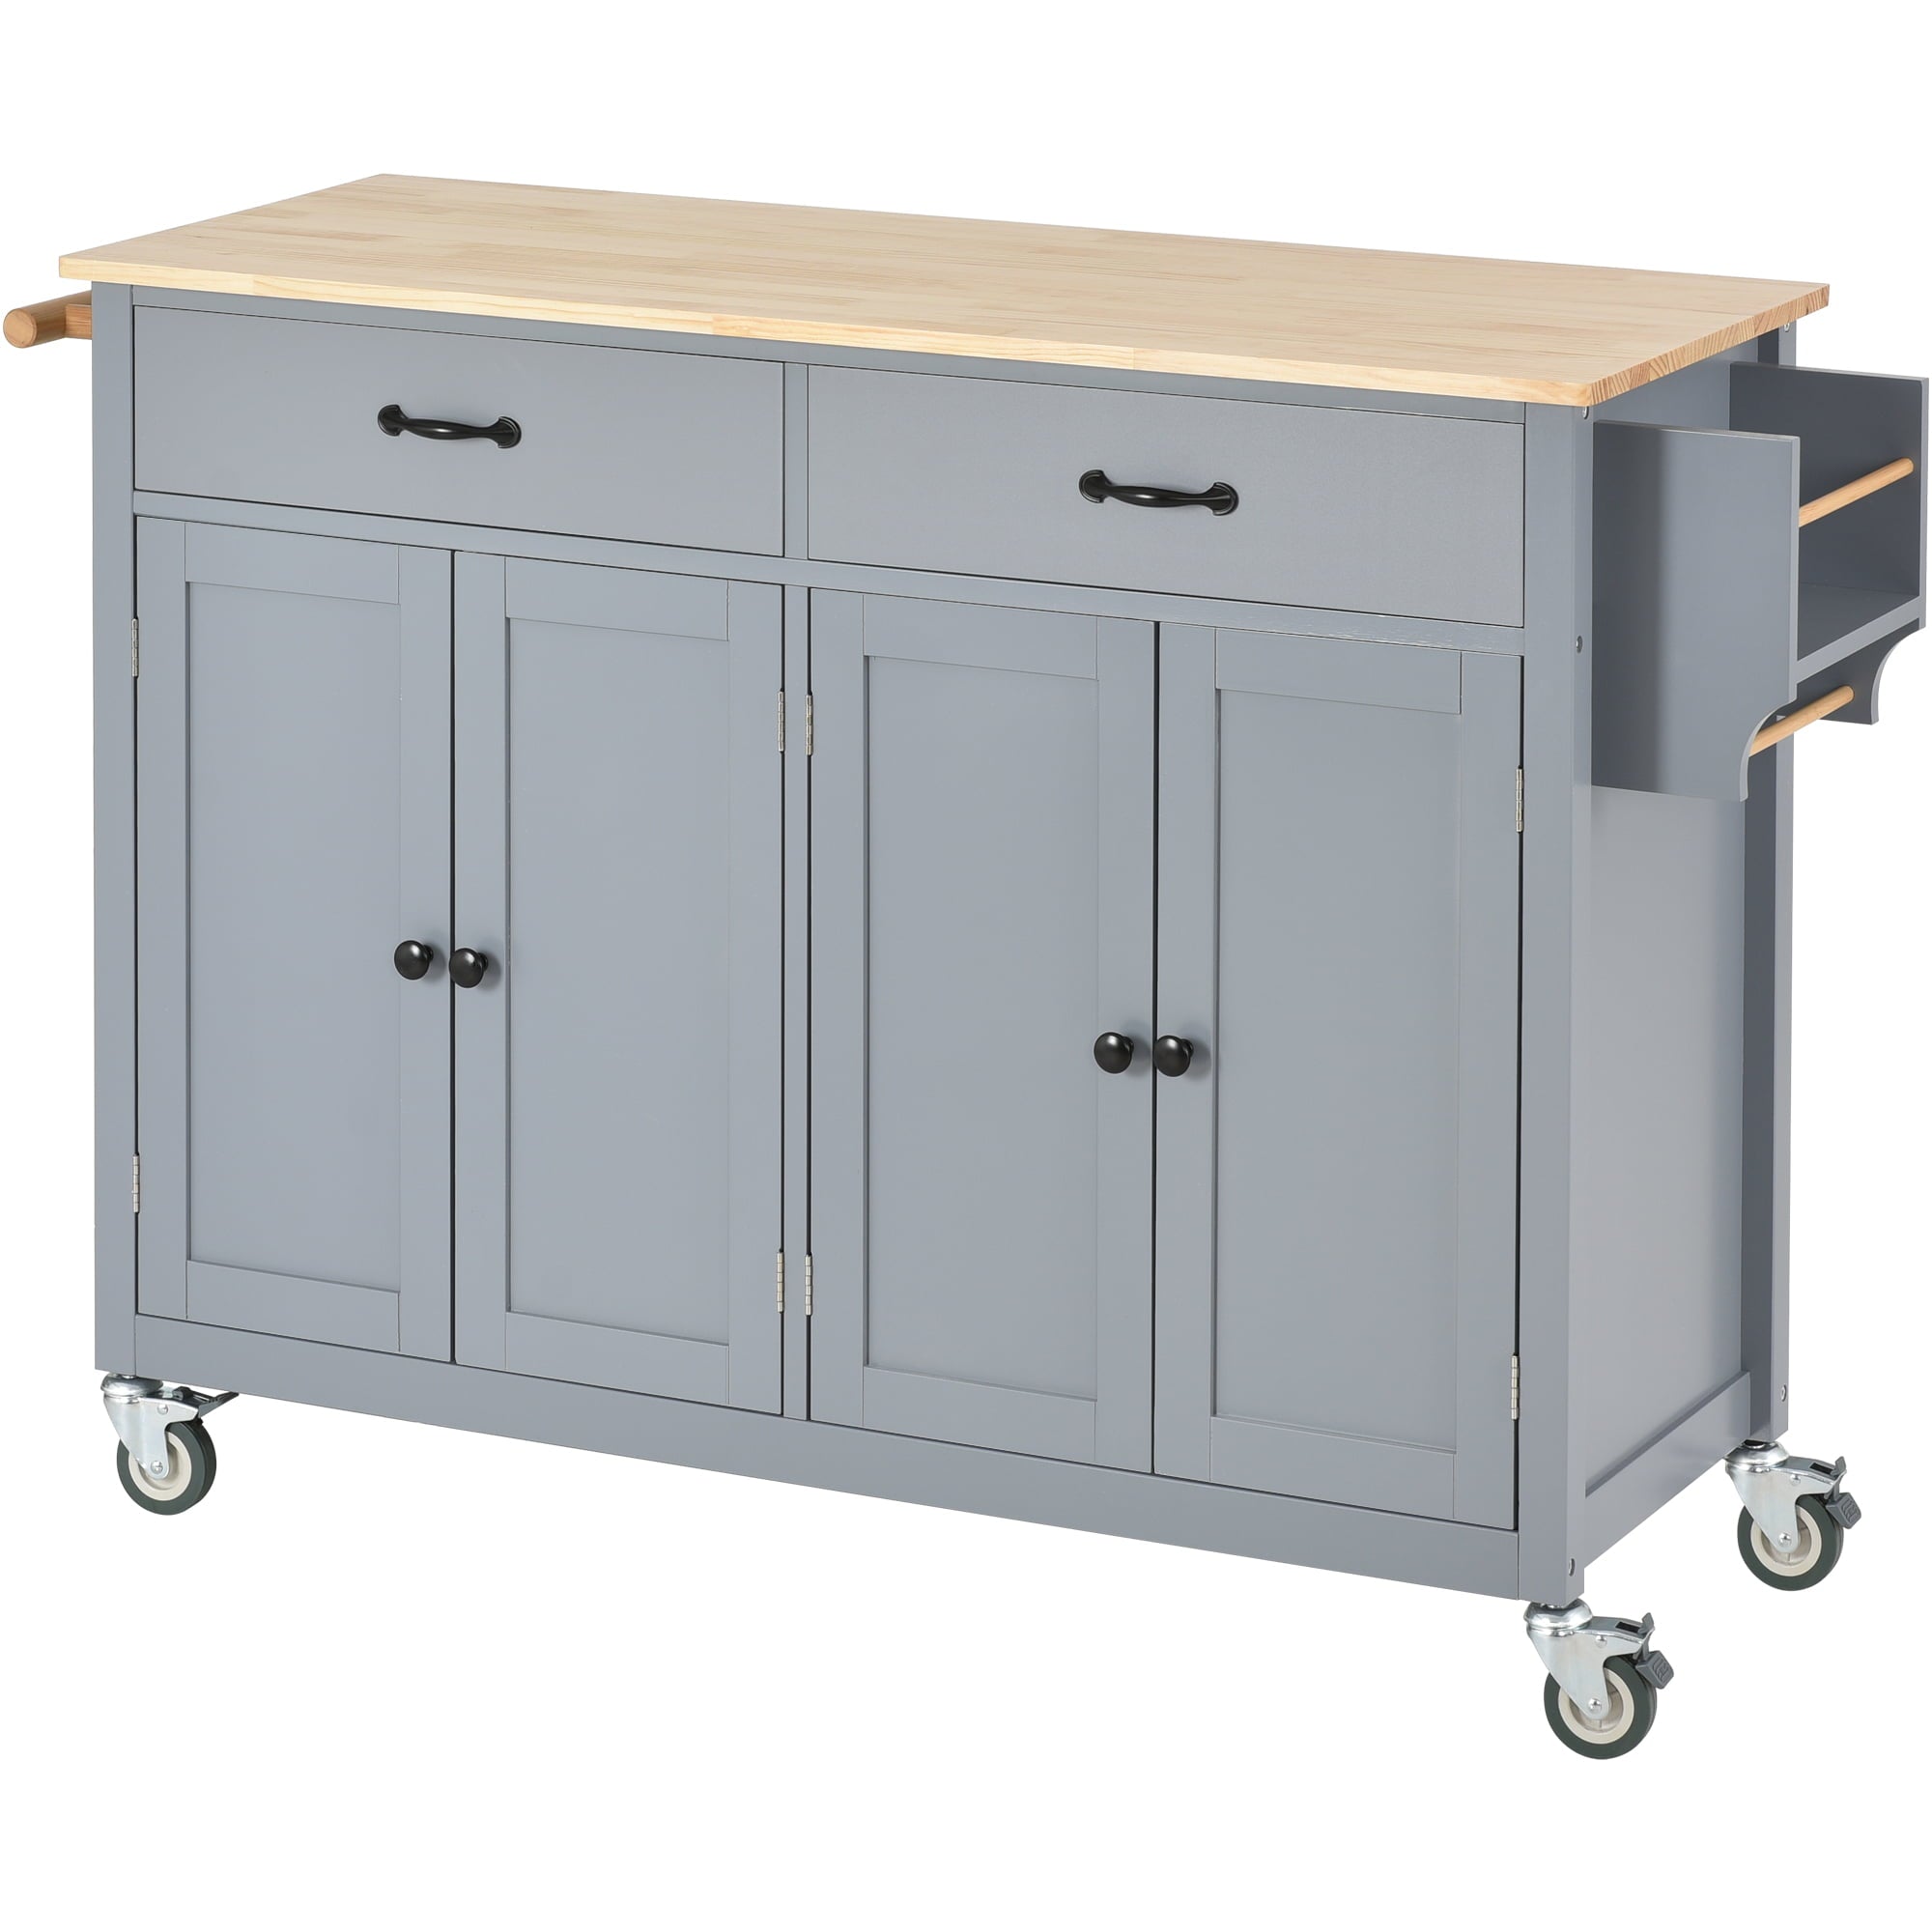 Kitchen Island on Wheels， Zarler Kitchen Island Cart with Solid Wood Top Utility Rolling Cart Trolley， GrayBlue